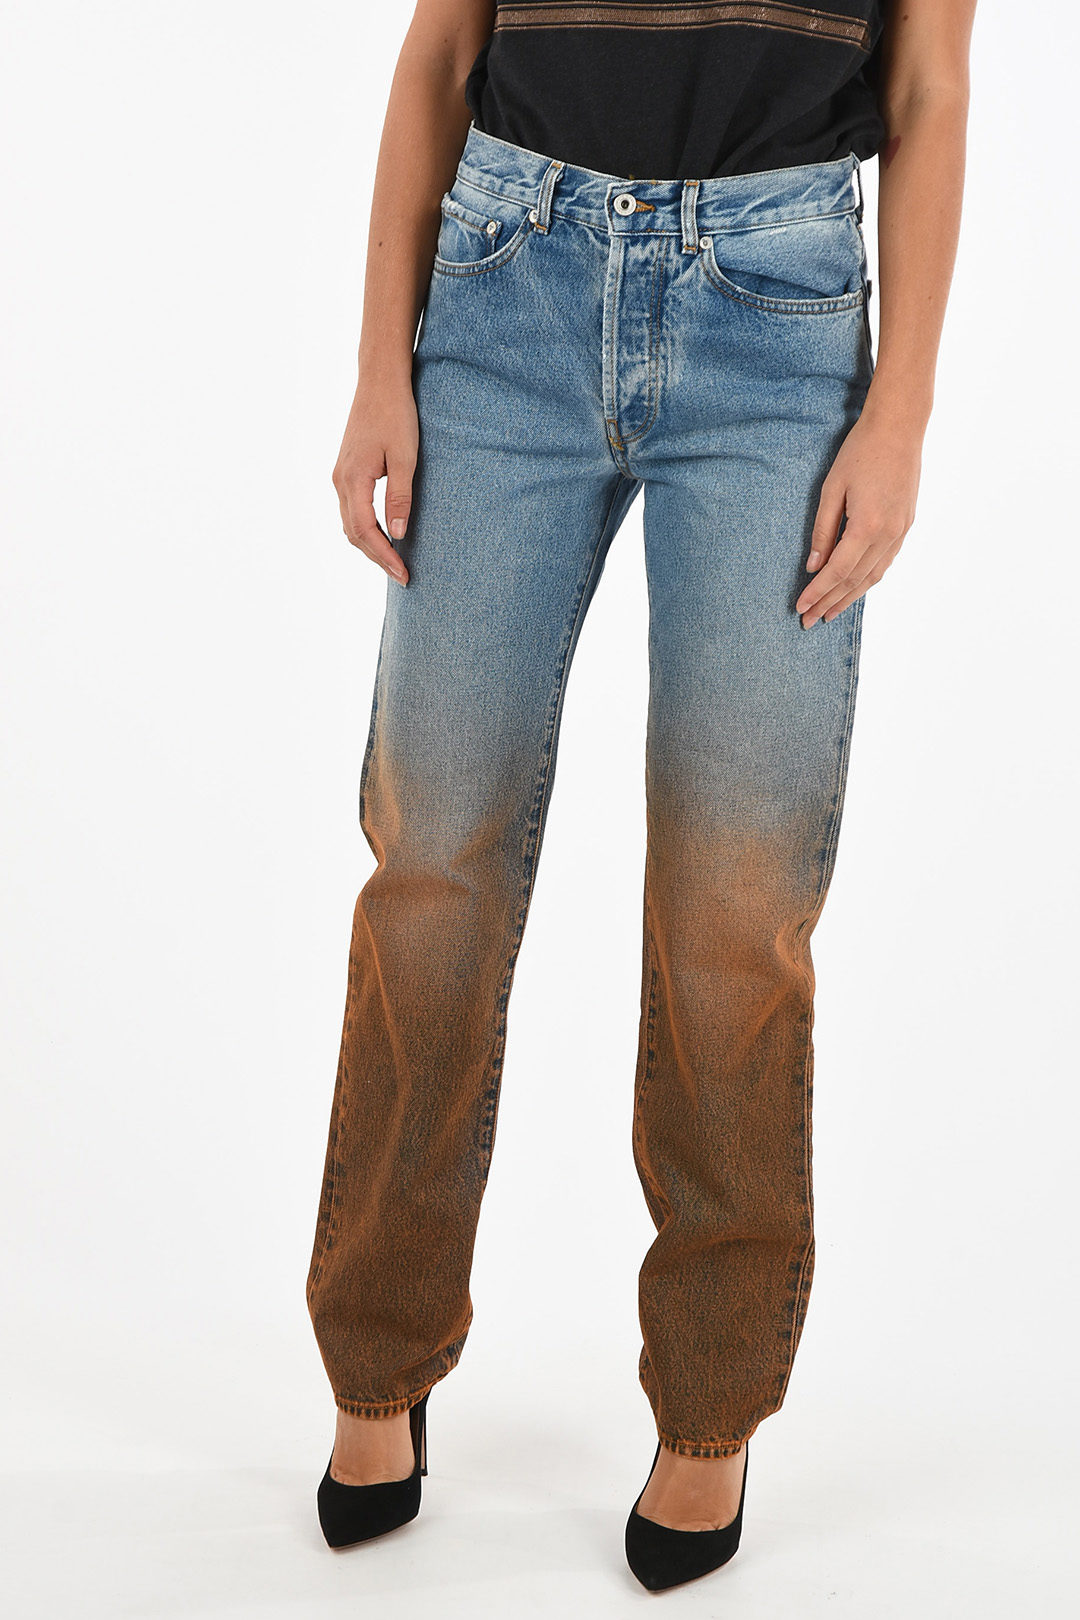 Off-White Waist Jeans With Faded Effect women - Glamood Outlet